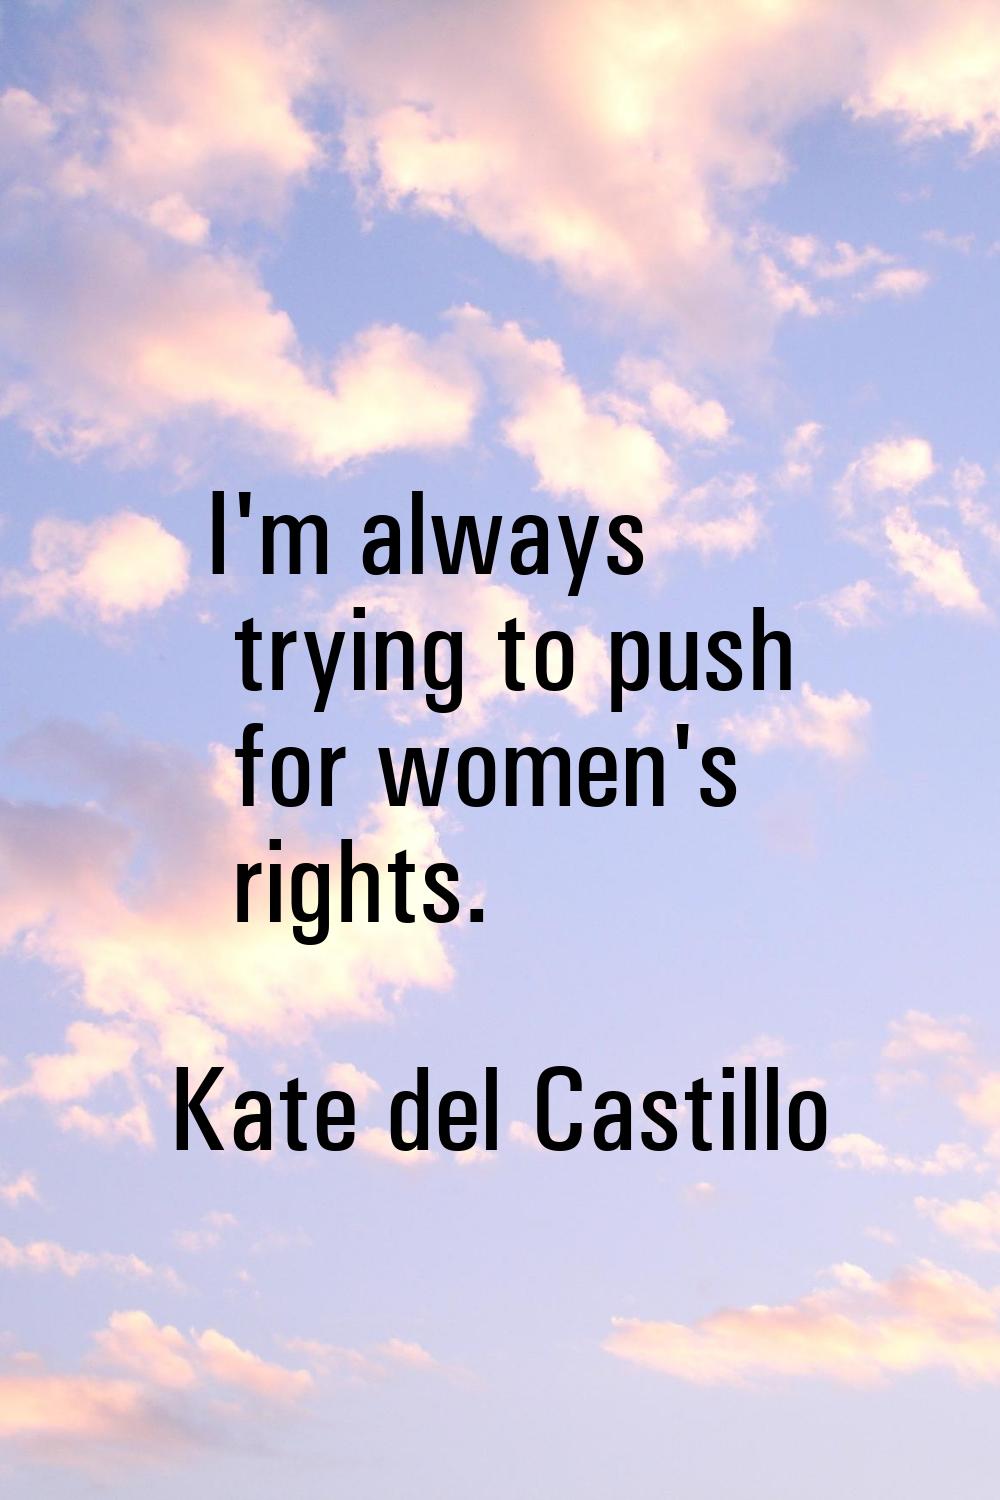 I'm always trying to push for women's rights.